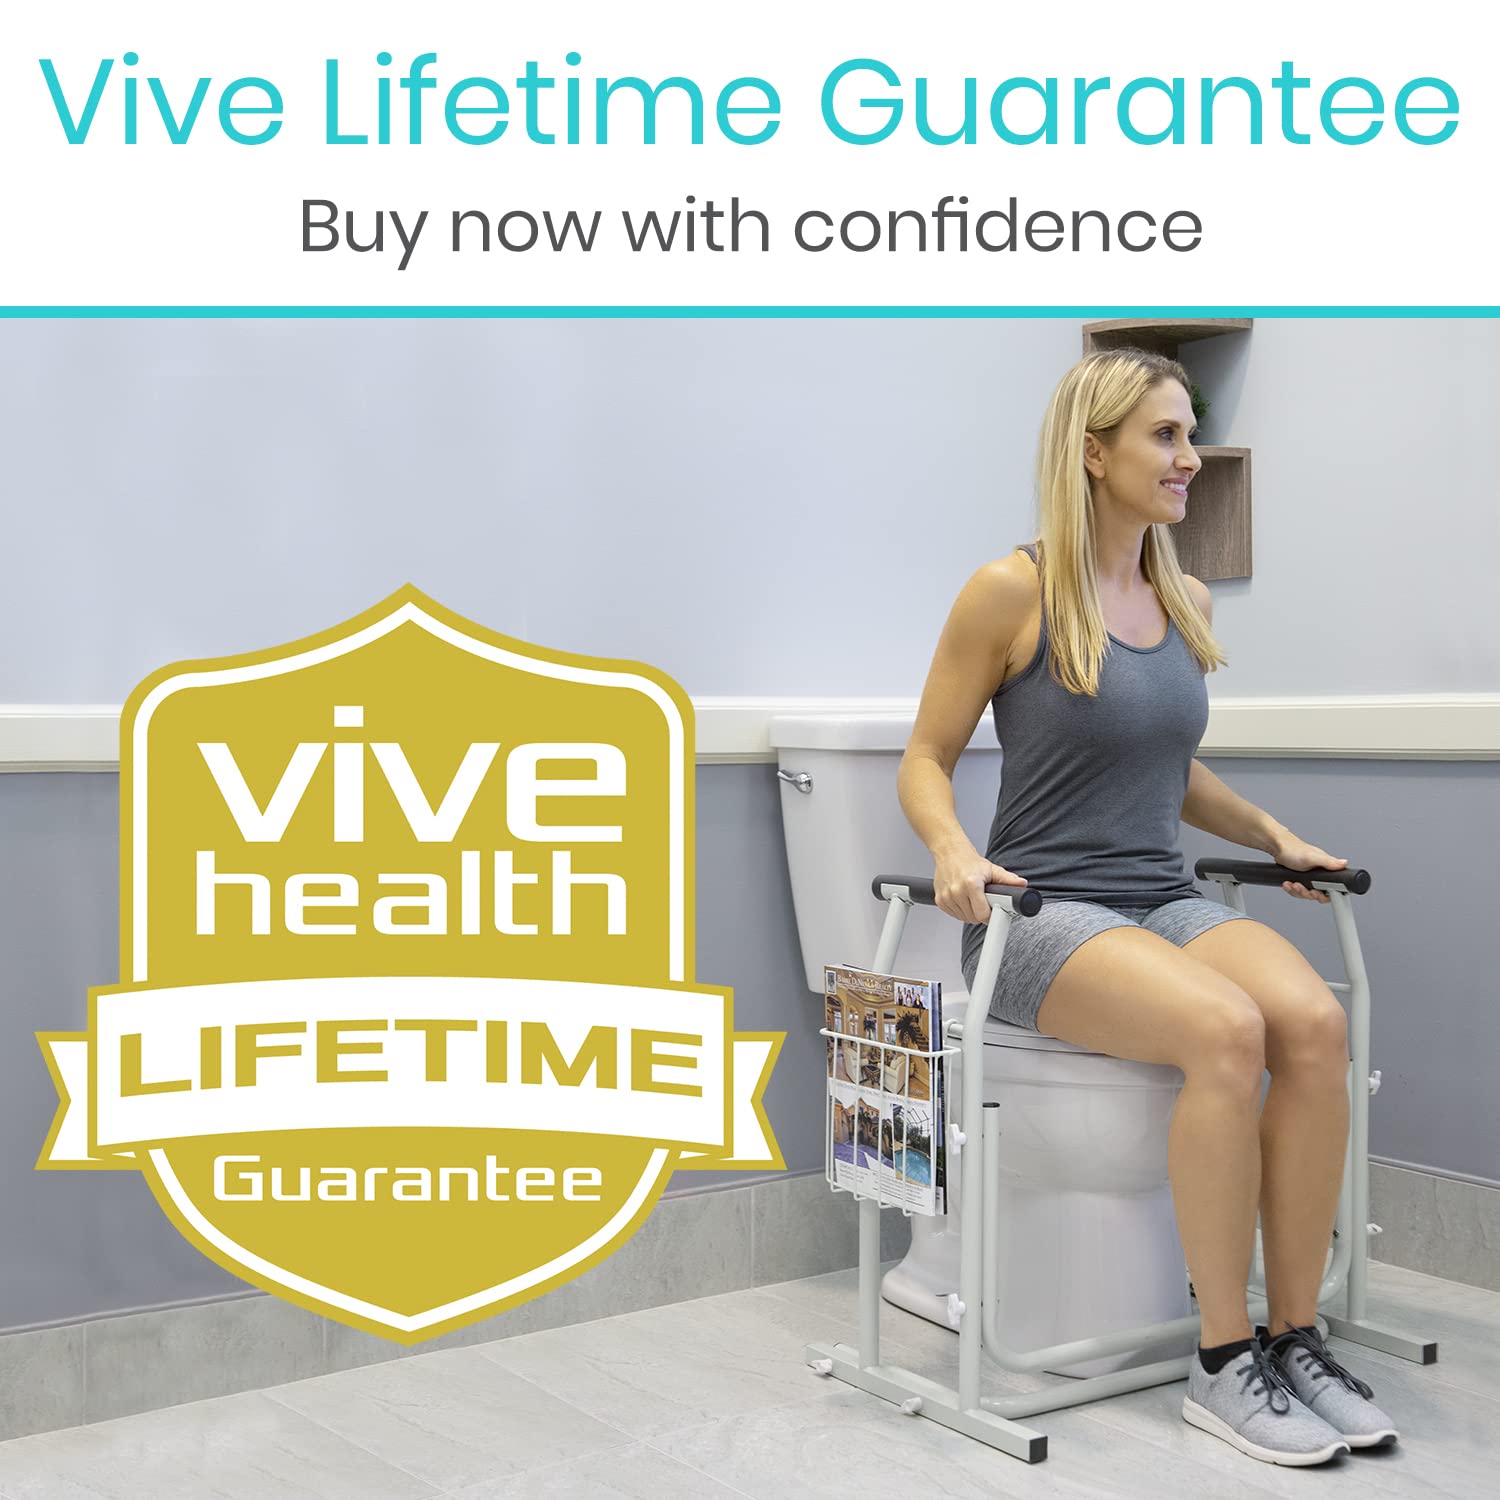 Vive Stand Alone Toilet Rail - Medical Bathroom Safety Assist Frame with Support Grab Bar Handles & Railings for Elderly, Senior, Handicap & Disabled - Freestanding Commode Stability Handrails